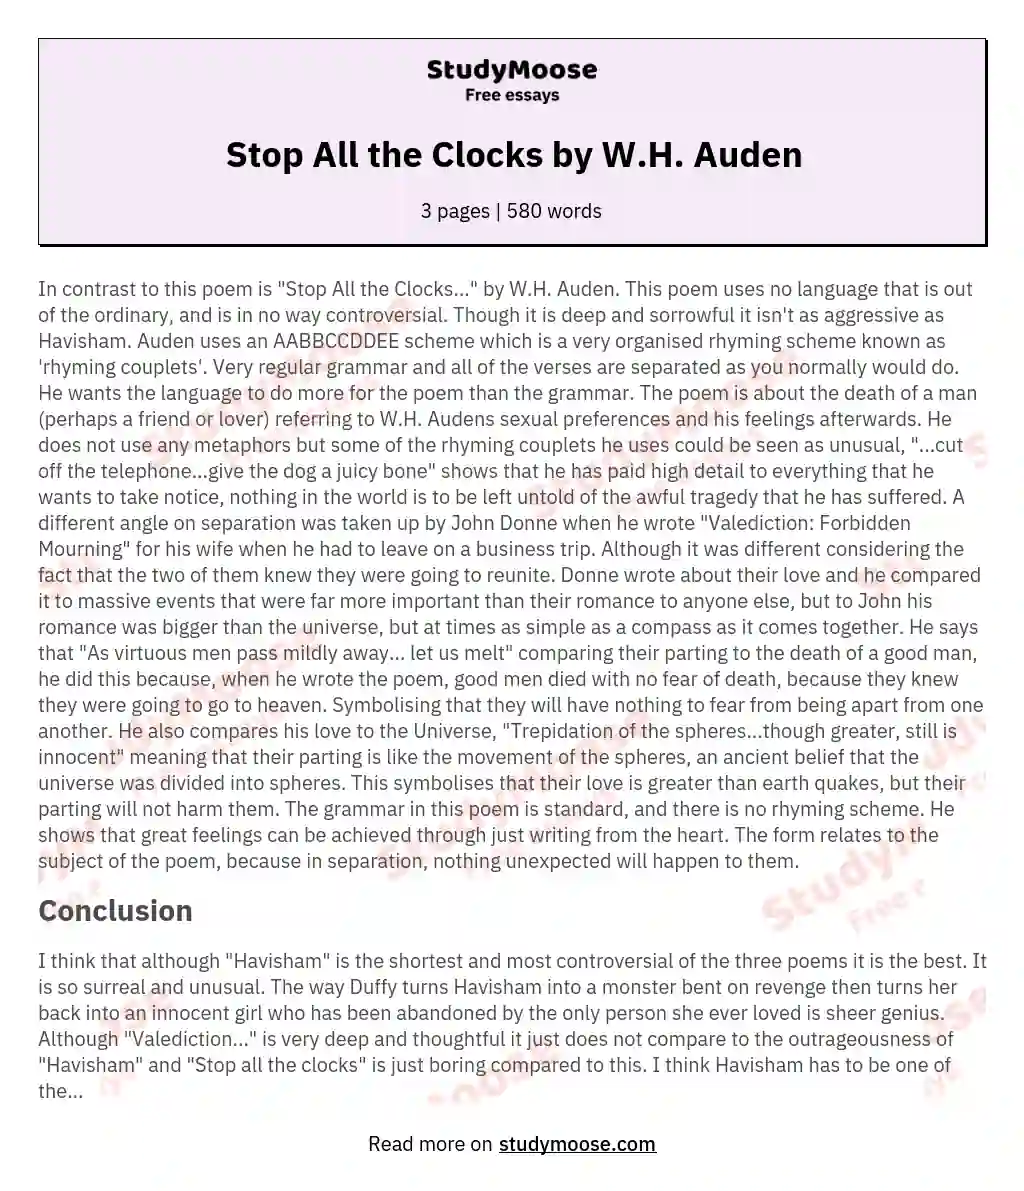 Stop All the Clocks by W.H. Auden essay